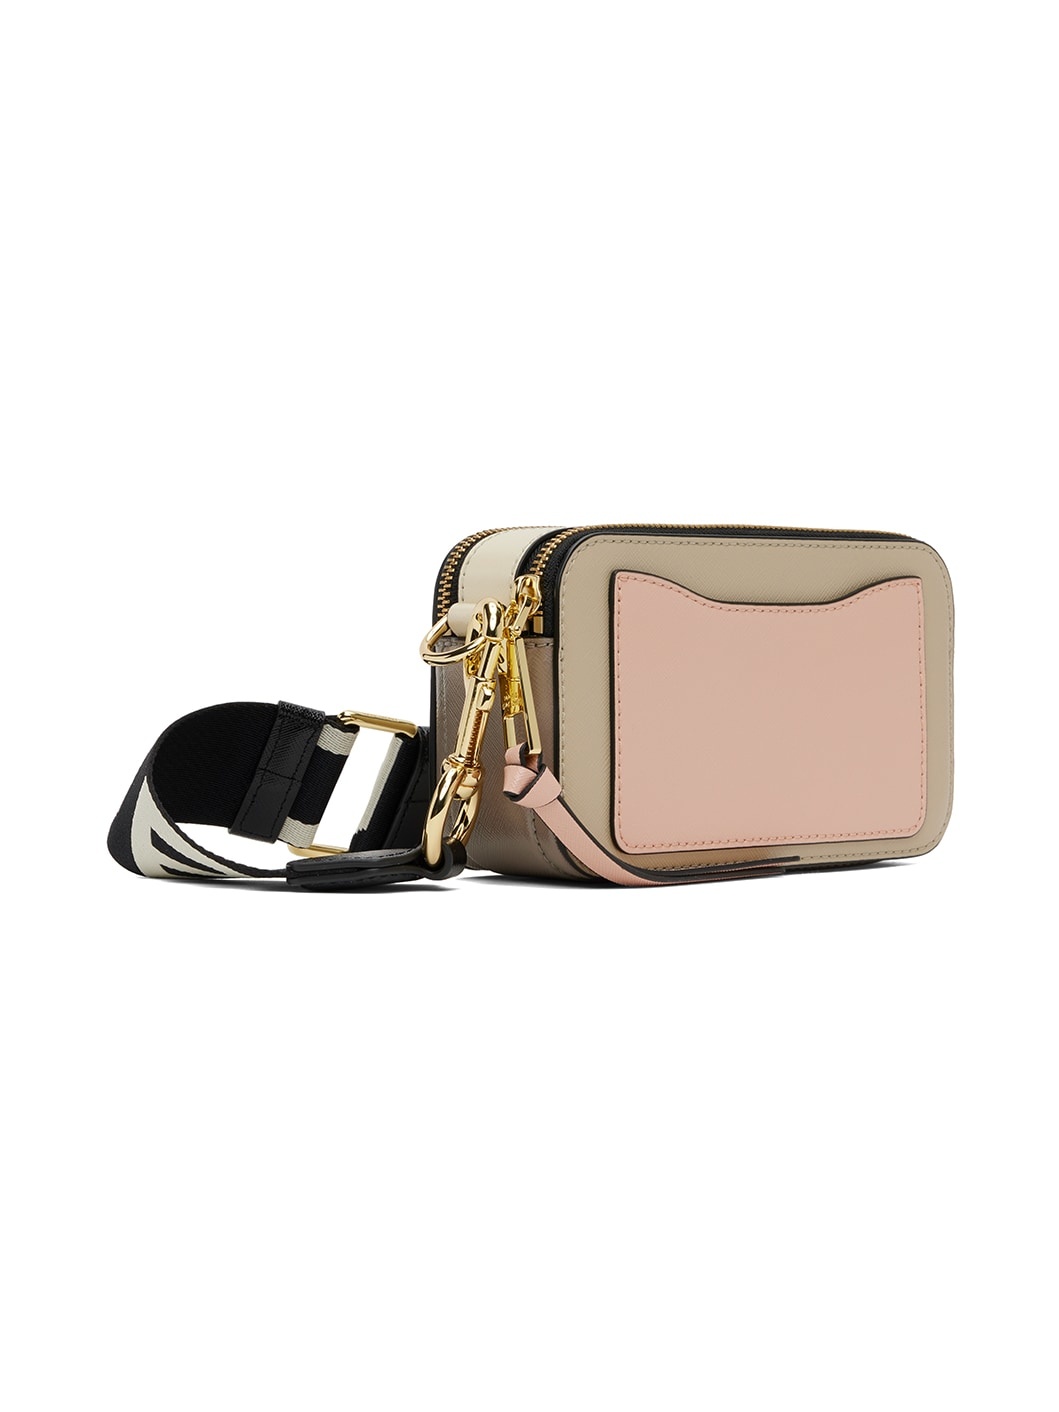 MARC JACOBS - SAFFIANO LEATHER SNAPSHOT BAG WITH LOGOED SHOULDER